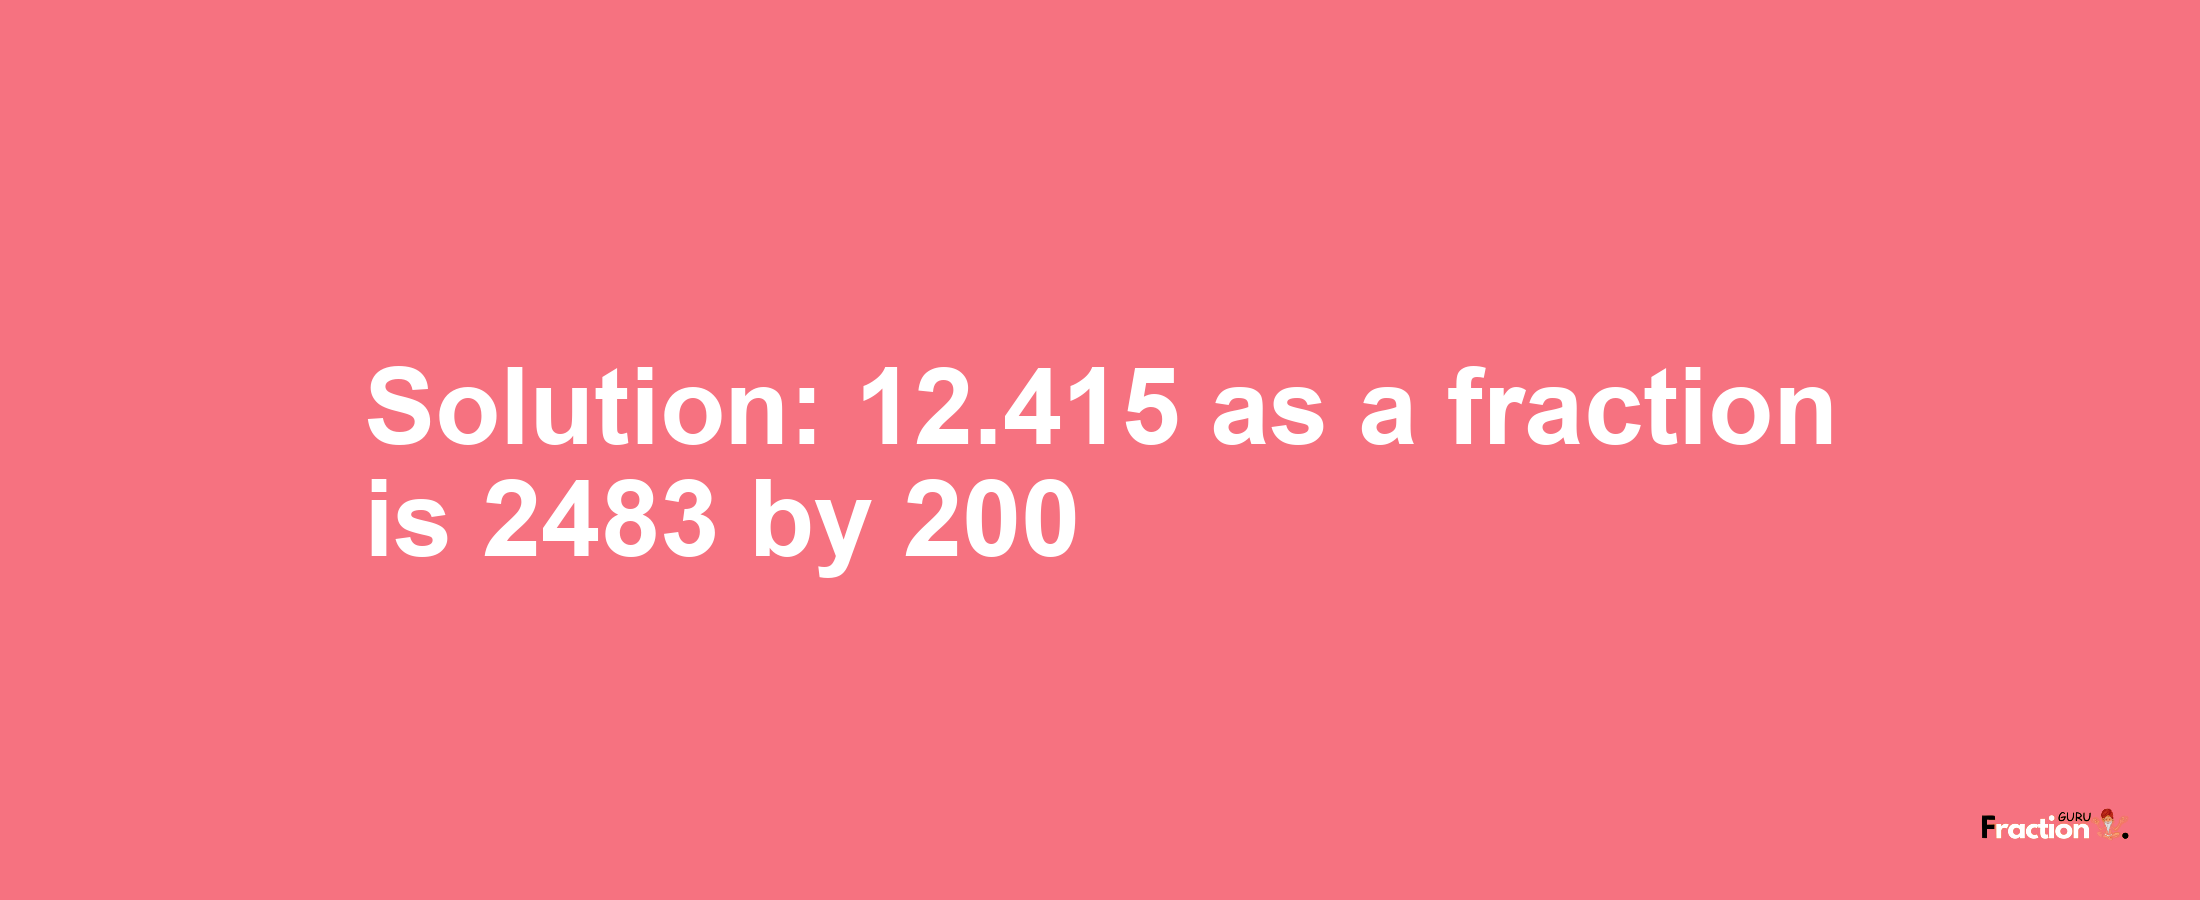 Solution:12.415 as a fraction is 2483/200